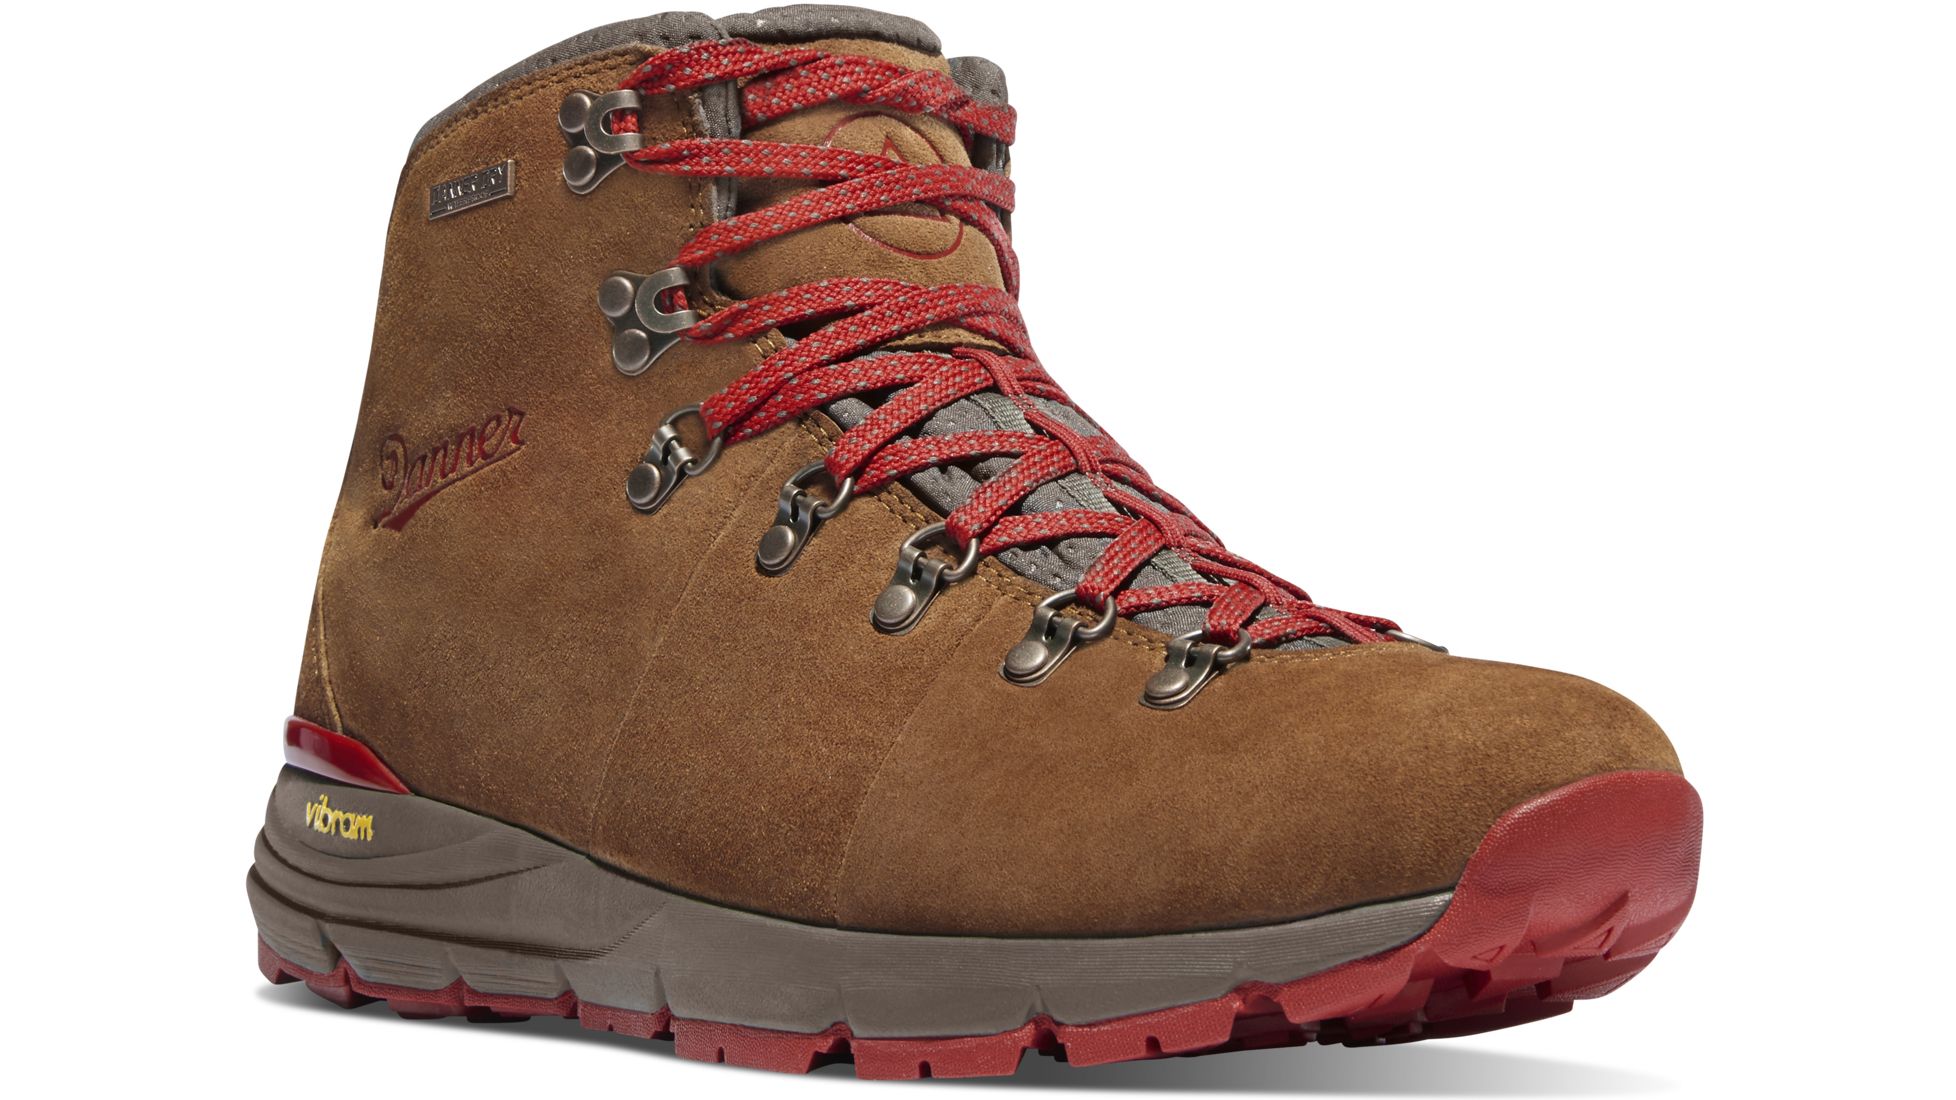 Danner Mountain 600 4.5in Hiking Shoes - Women's | 5 Star Rating w/ Free S&H